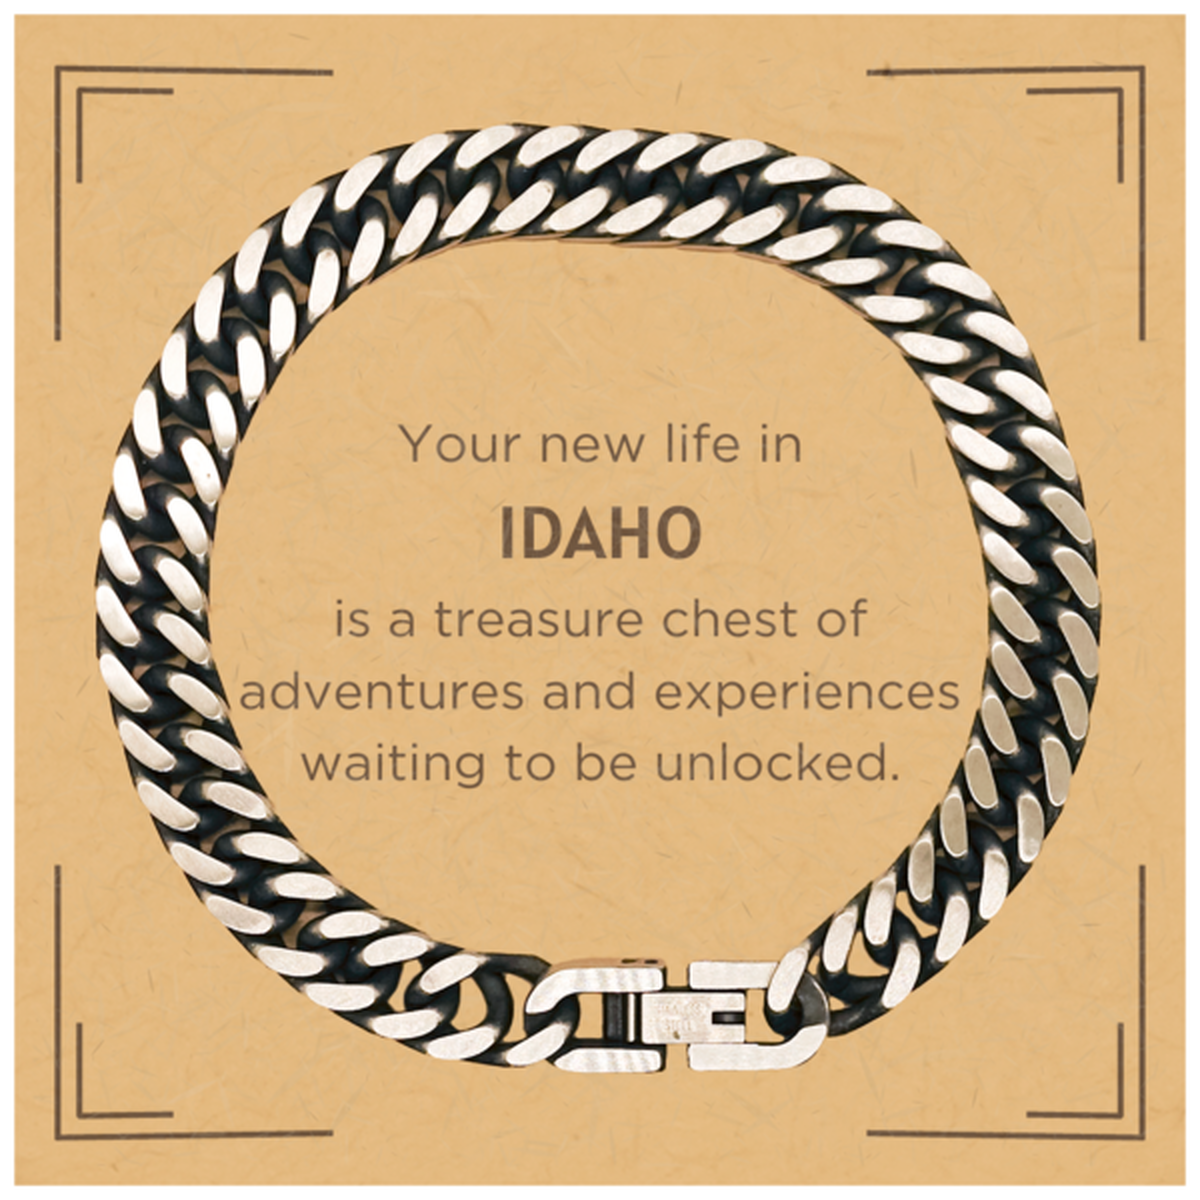 Moving to Idaho Gifts, Your new life in Idaho, Long Distance Idaho Christmas Cuban Link Chain Bracelet For Men, Women, Friends, Coworkers